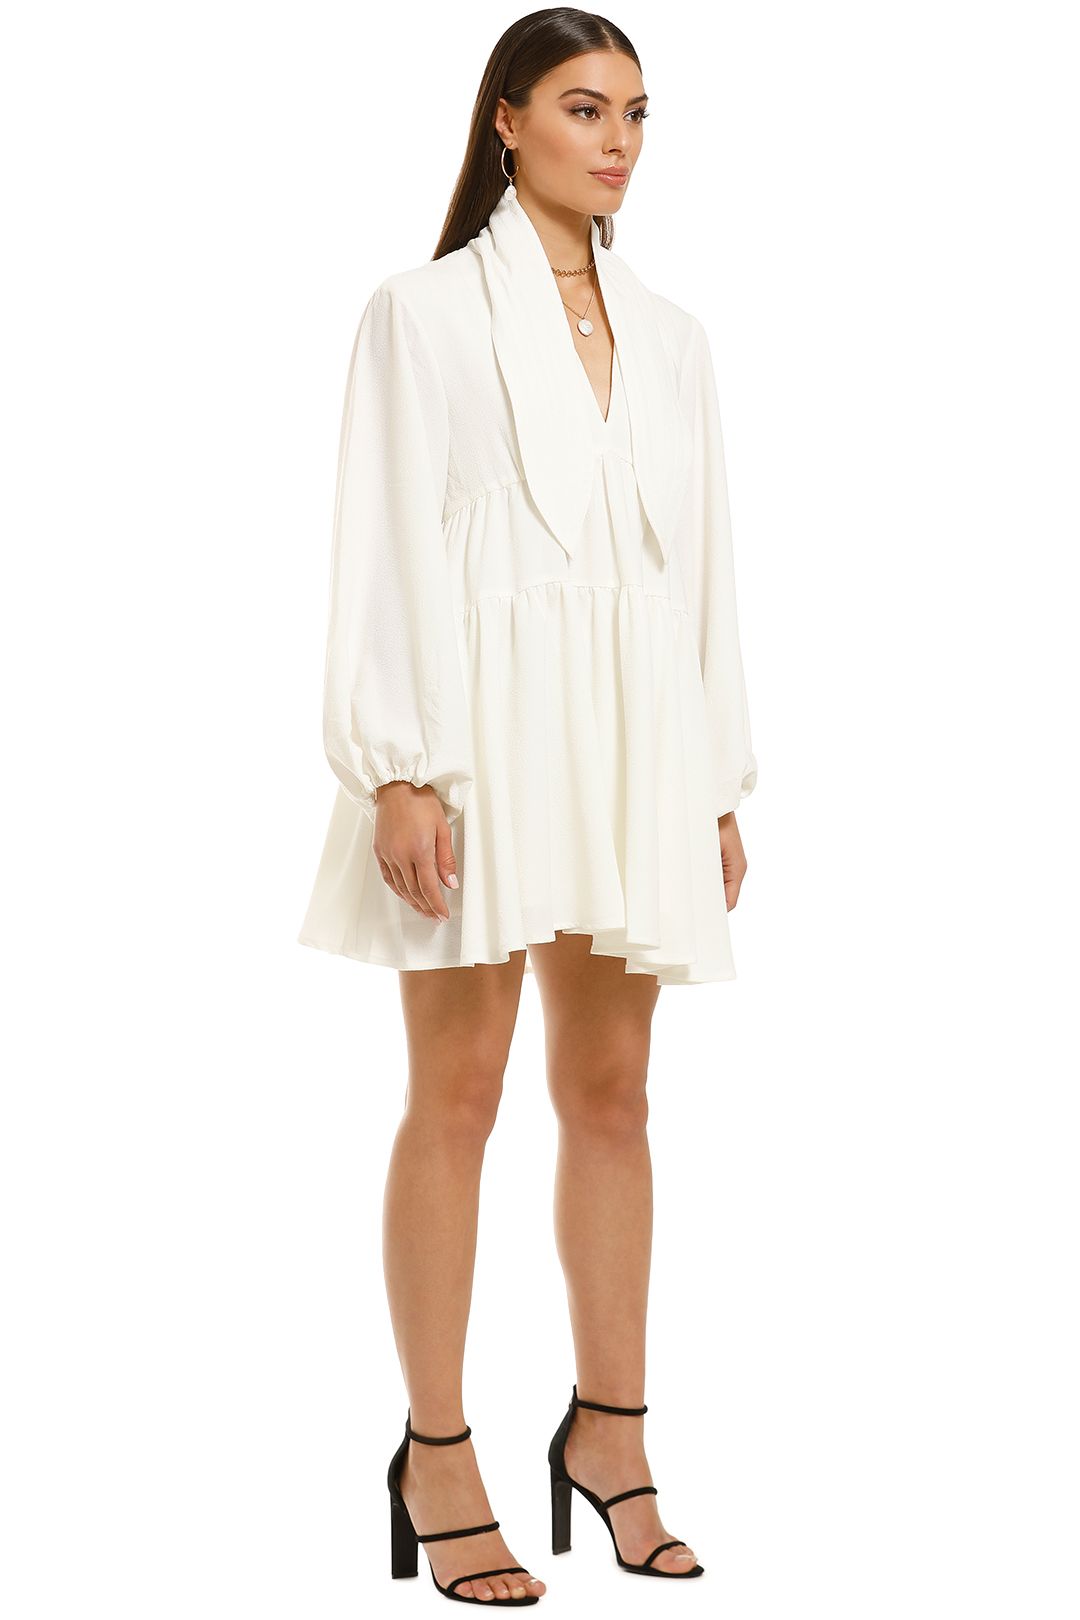 CMEO-Collective-Chapter-One-LS-Dress-White-Side